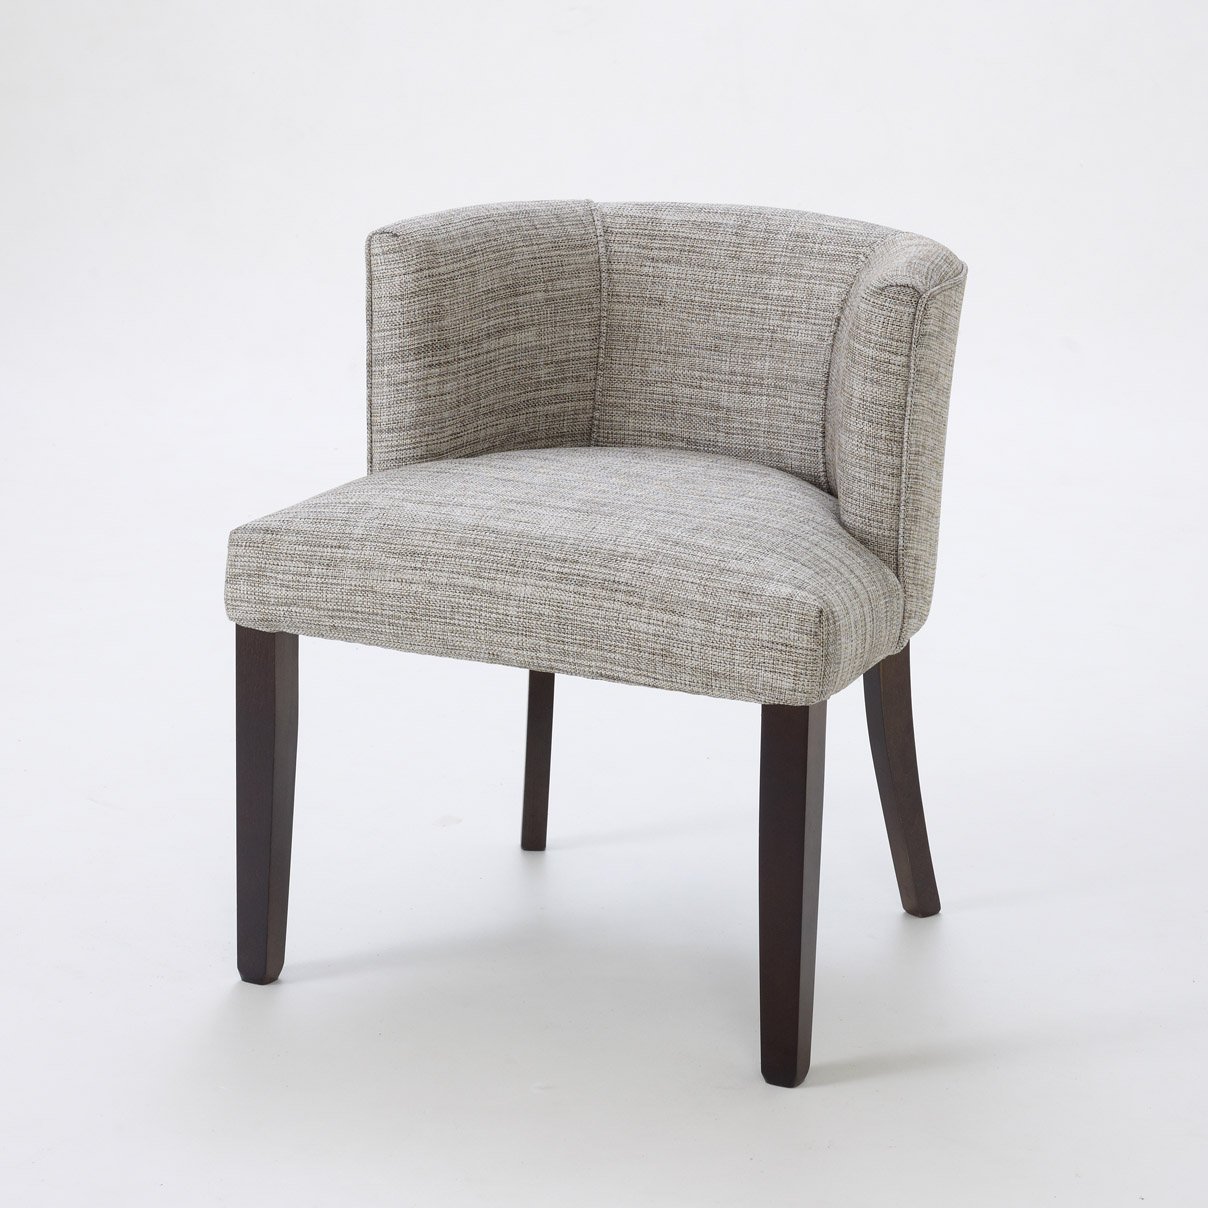 Cheam low back chair - Shackletons